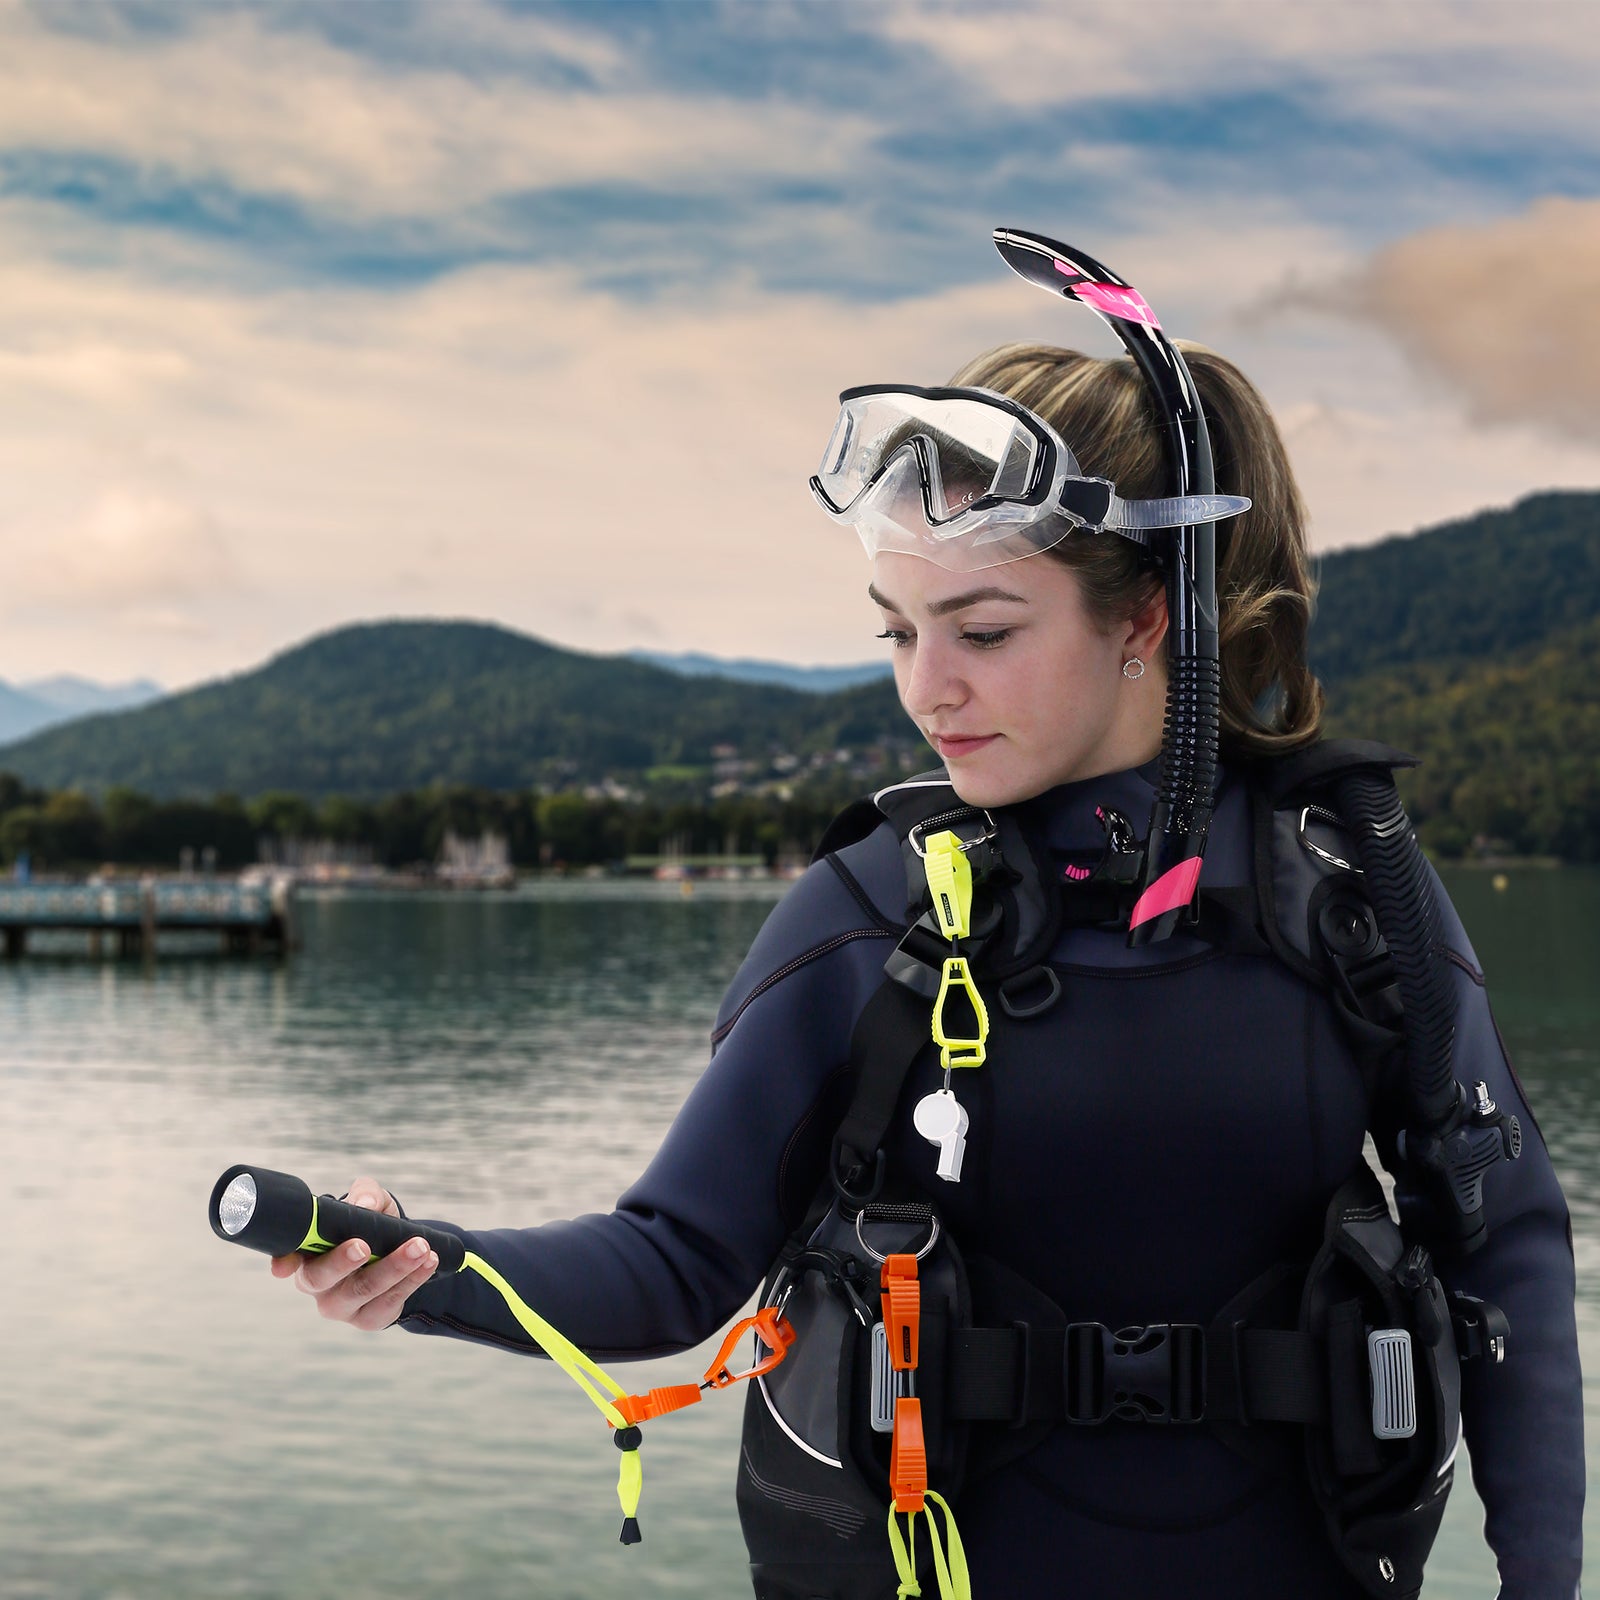 Woman using several JORESTECH glove clip safety holder clipped to her diving gear with accessories attached for easy and fast grab while doing sports.